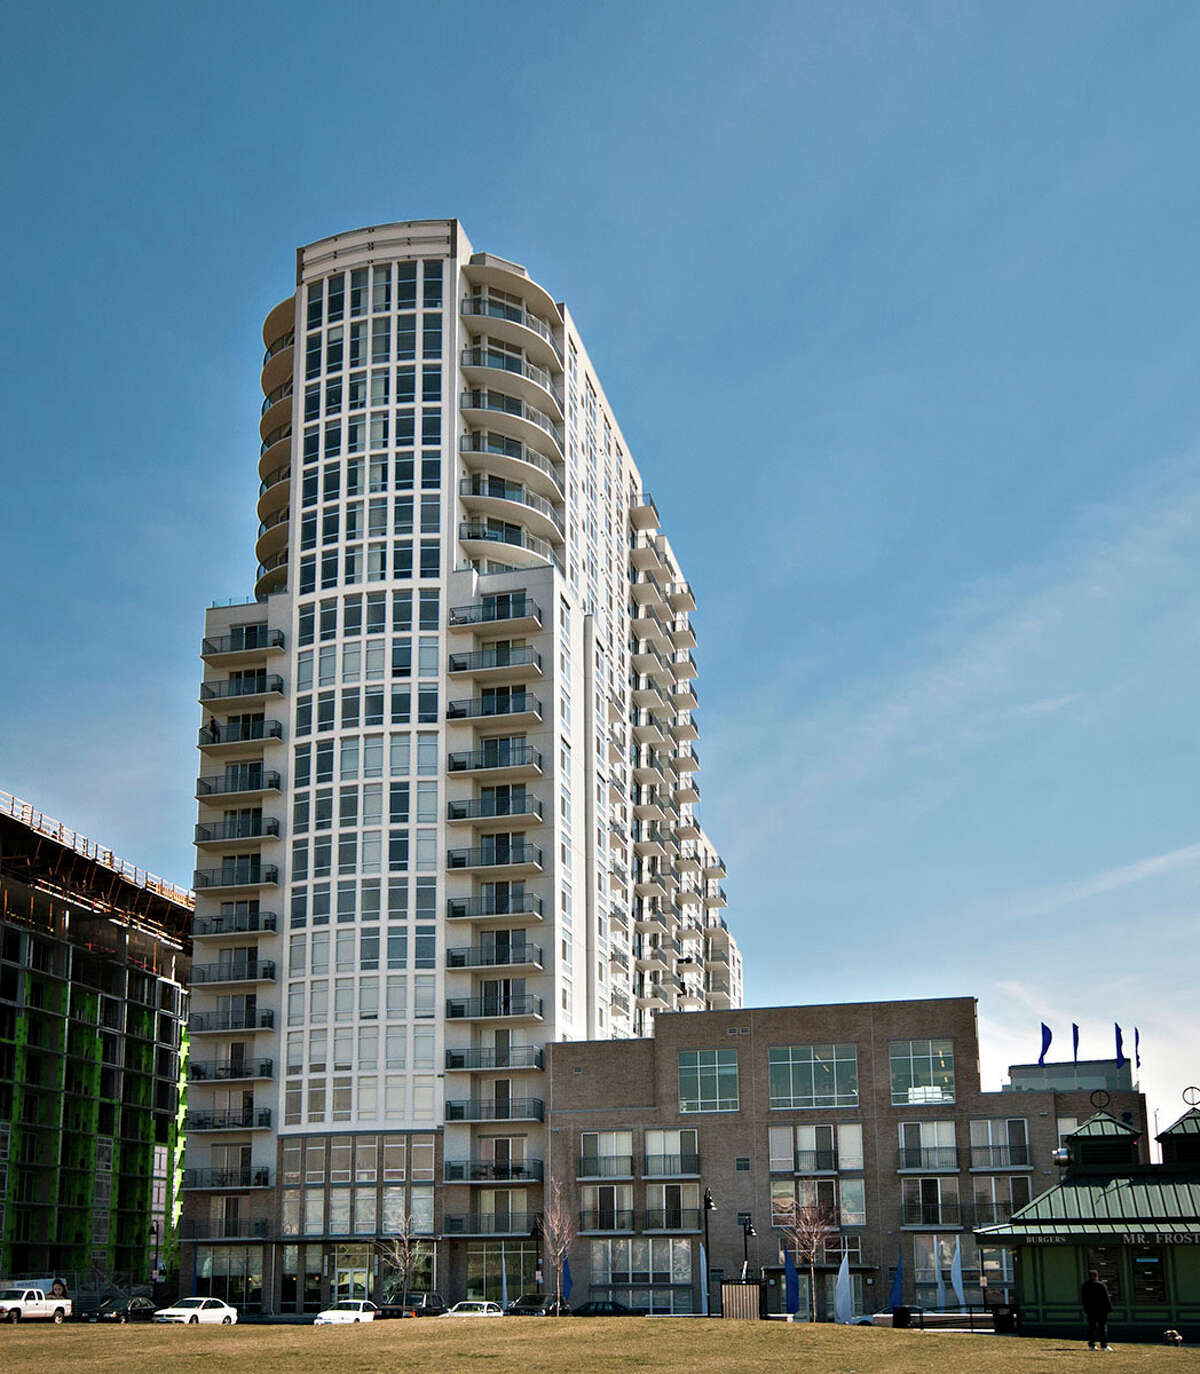 Shown is Building & Land Technology's Infinity Apartments at Harbor Point in Stamford. The 242-unit building was sold for $98.8 million to a company controlled by Clarion Partners.